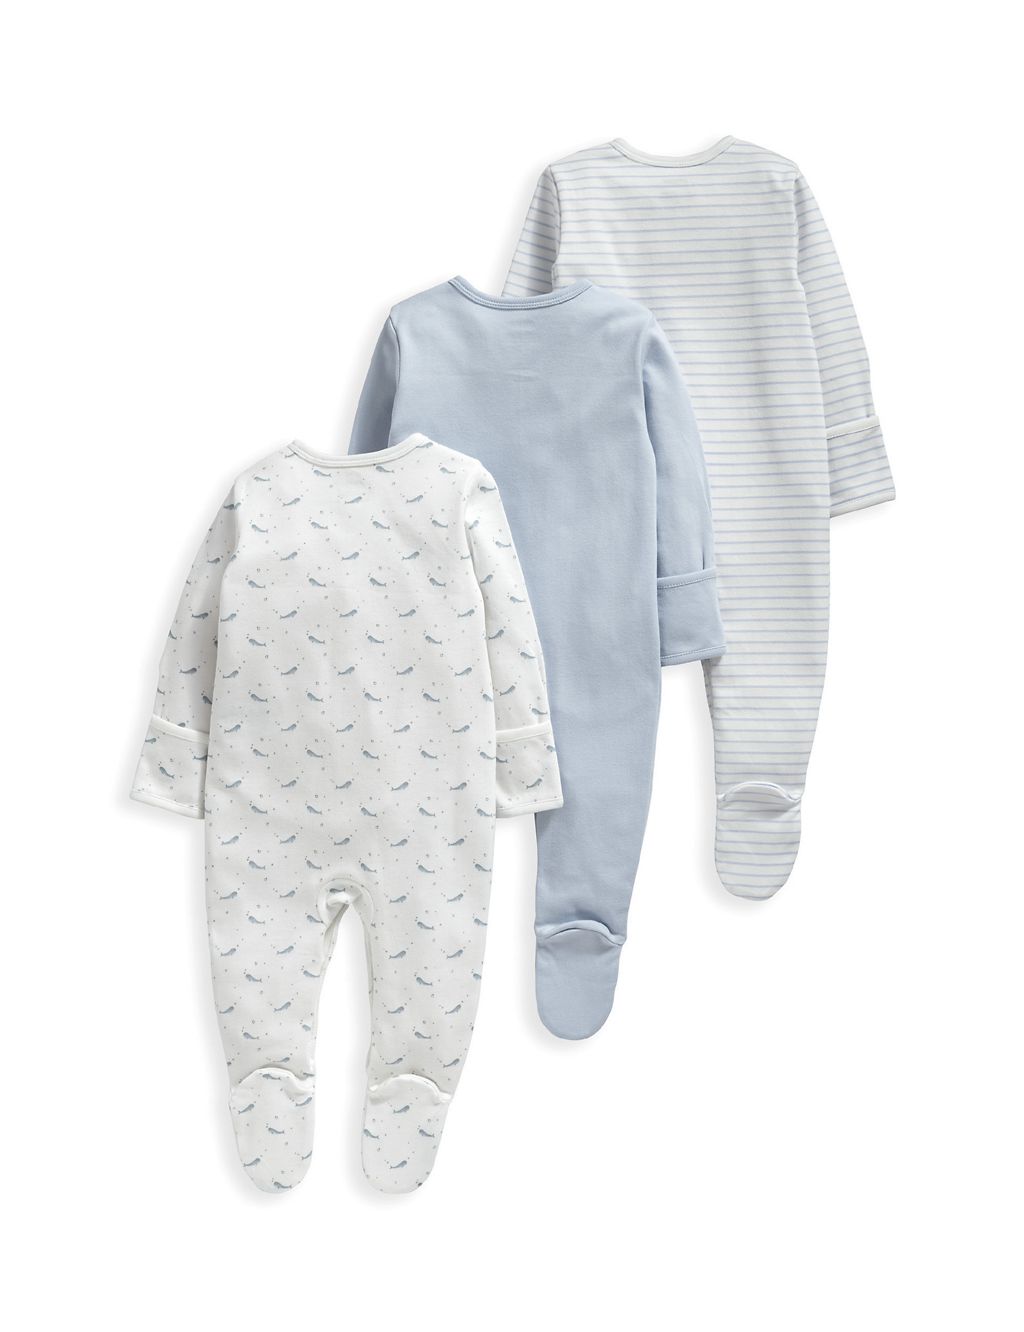 Whales Sleepsuits 3 Pack (6½lbs-18 Mths) 2 of 2